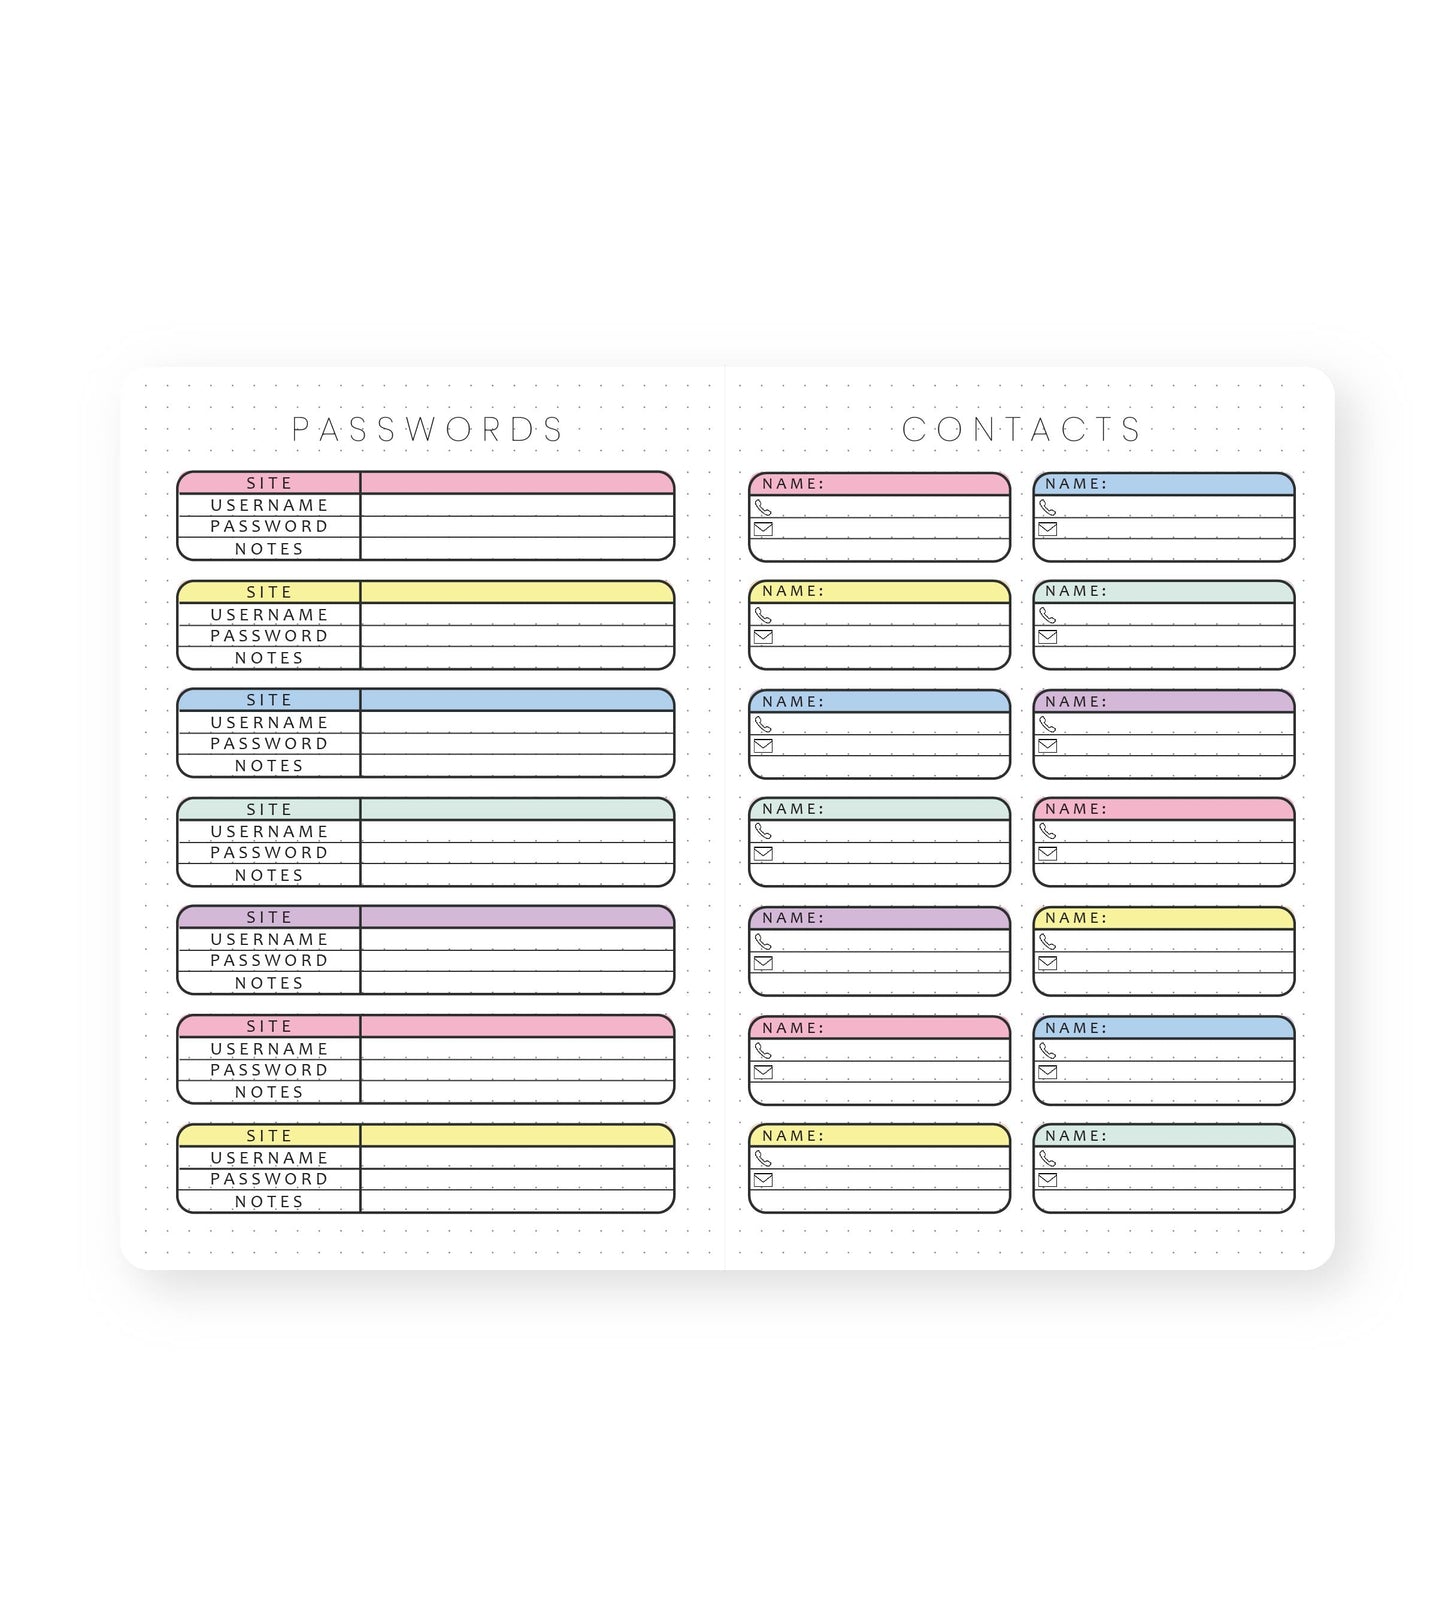 2024-25 Personalized Illustrated Planner Pointe Pink